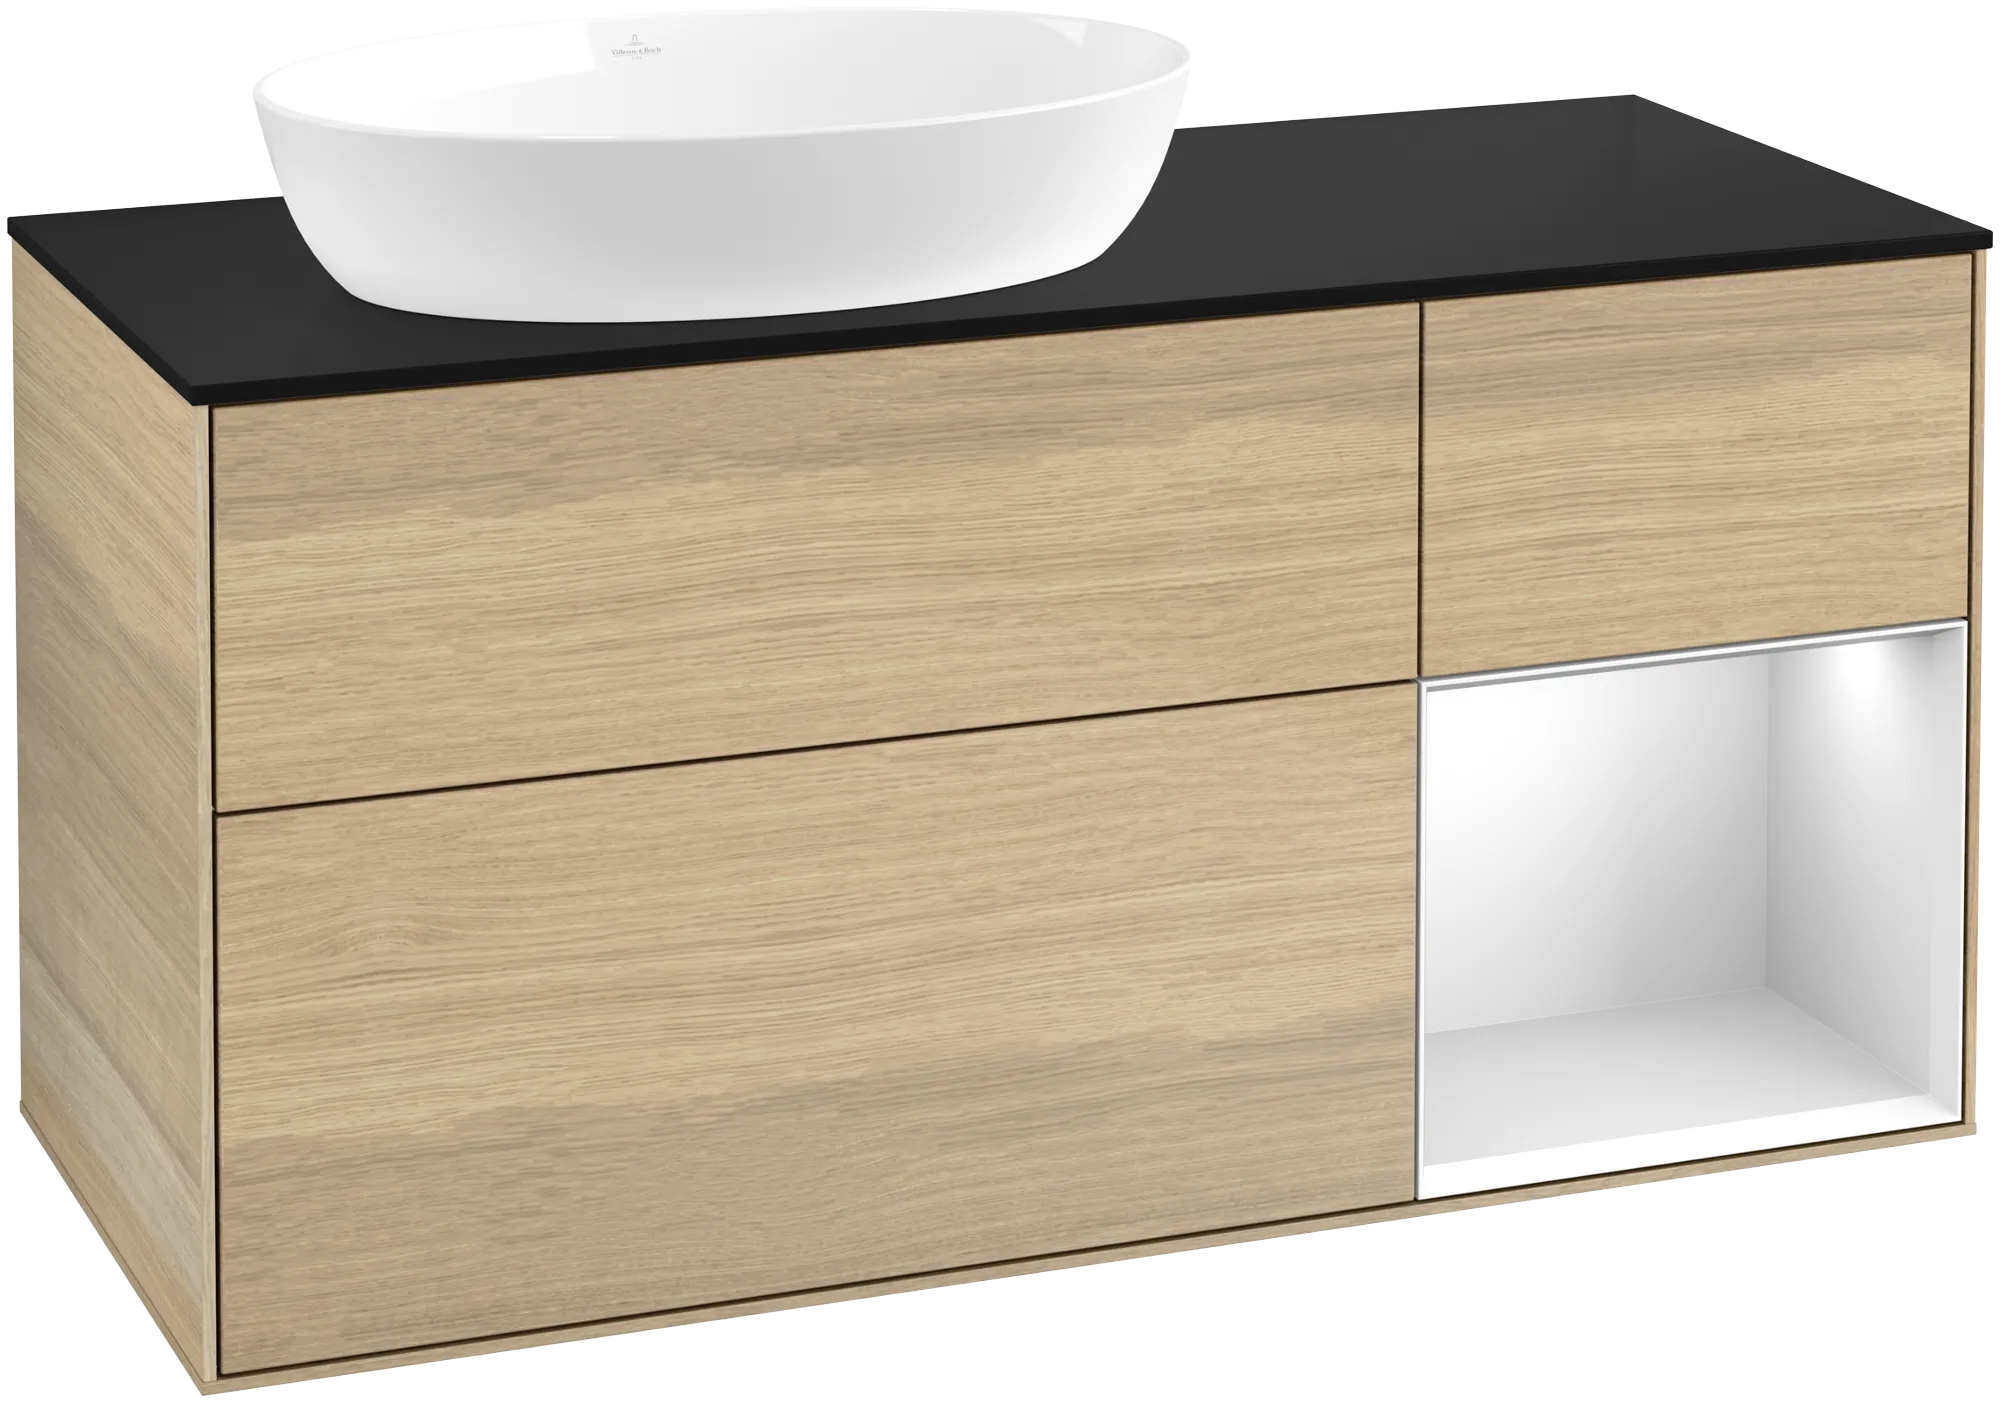 Picture of VILLEROY BOCH Finion Vanity unit, with lighting, 3 pull-out compartments, 1200 x 603 x 501 mm, Oak Veneer / White Matt Lacquer / Glass Black Matt #FA52MTPC